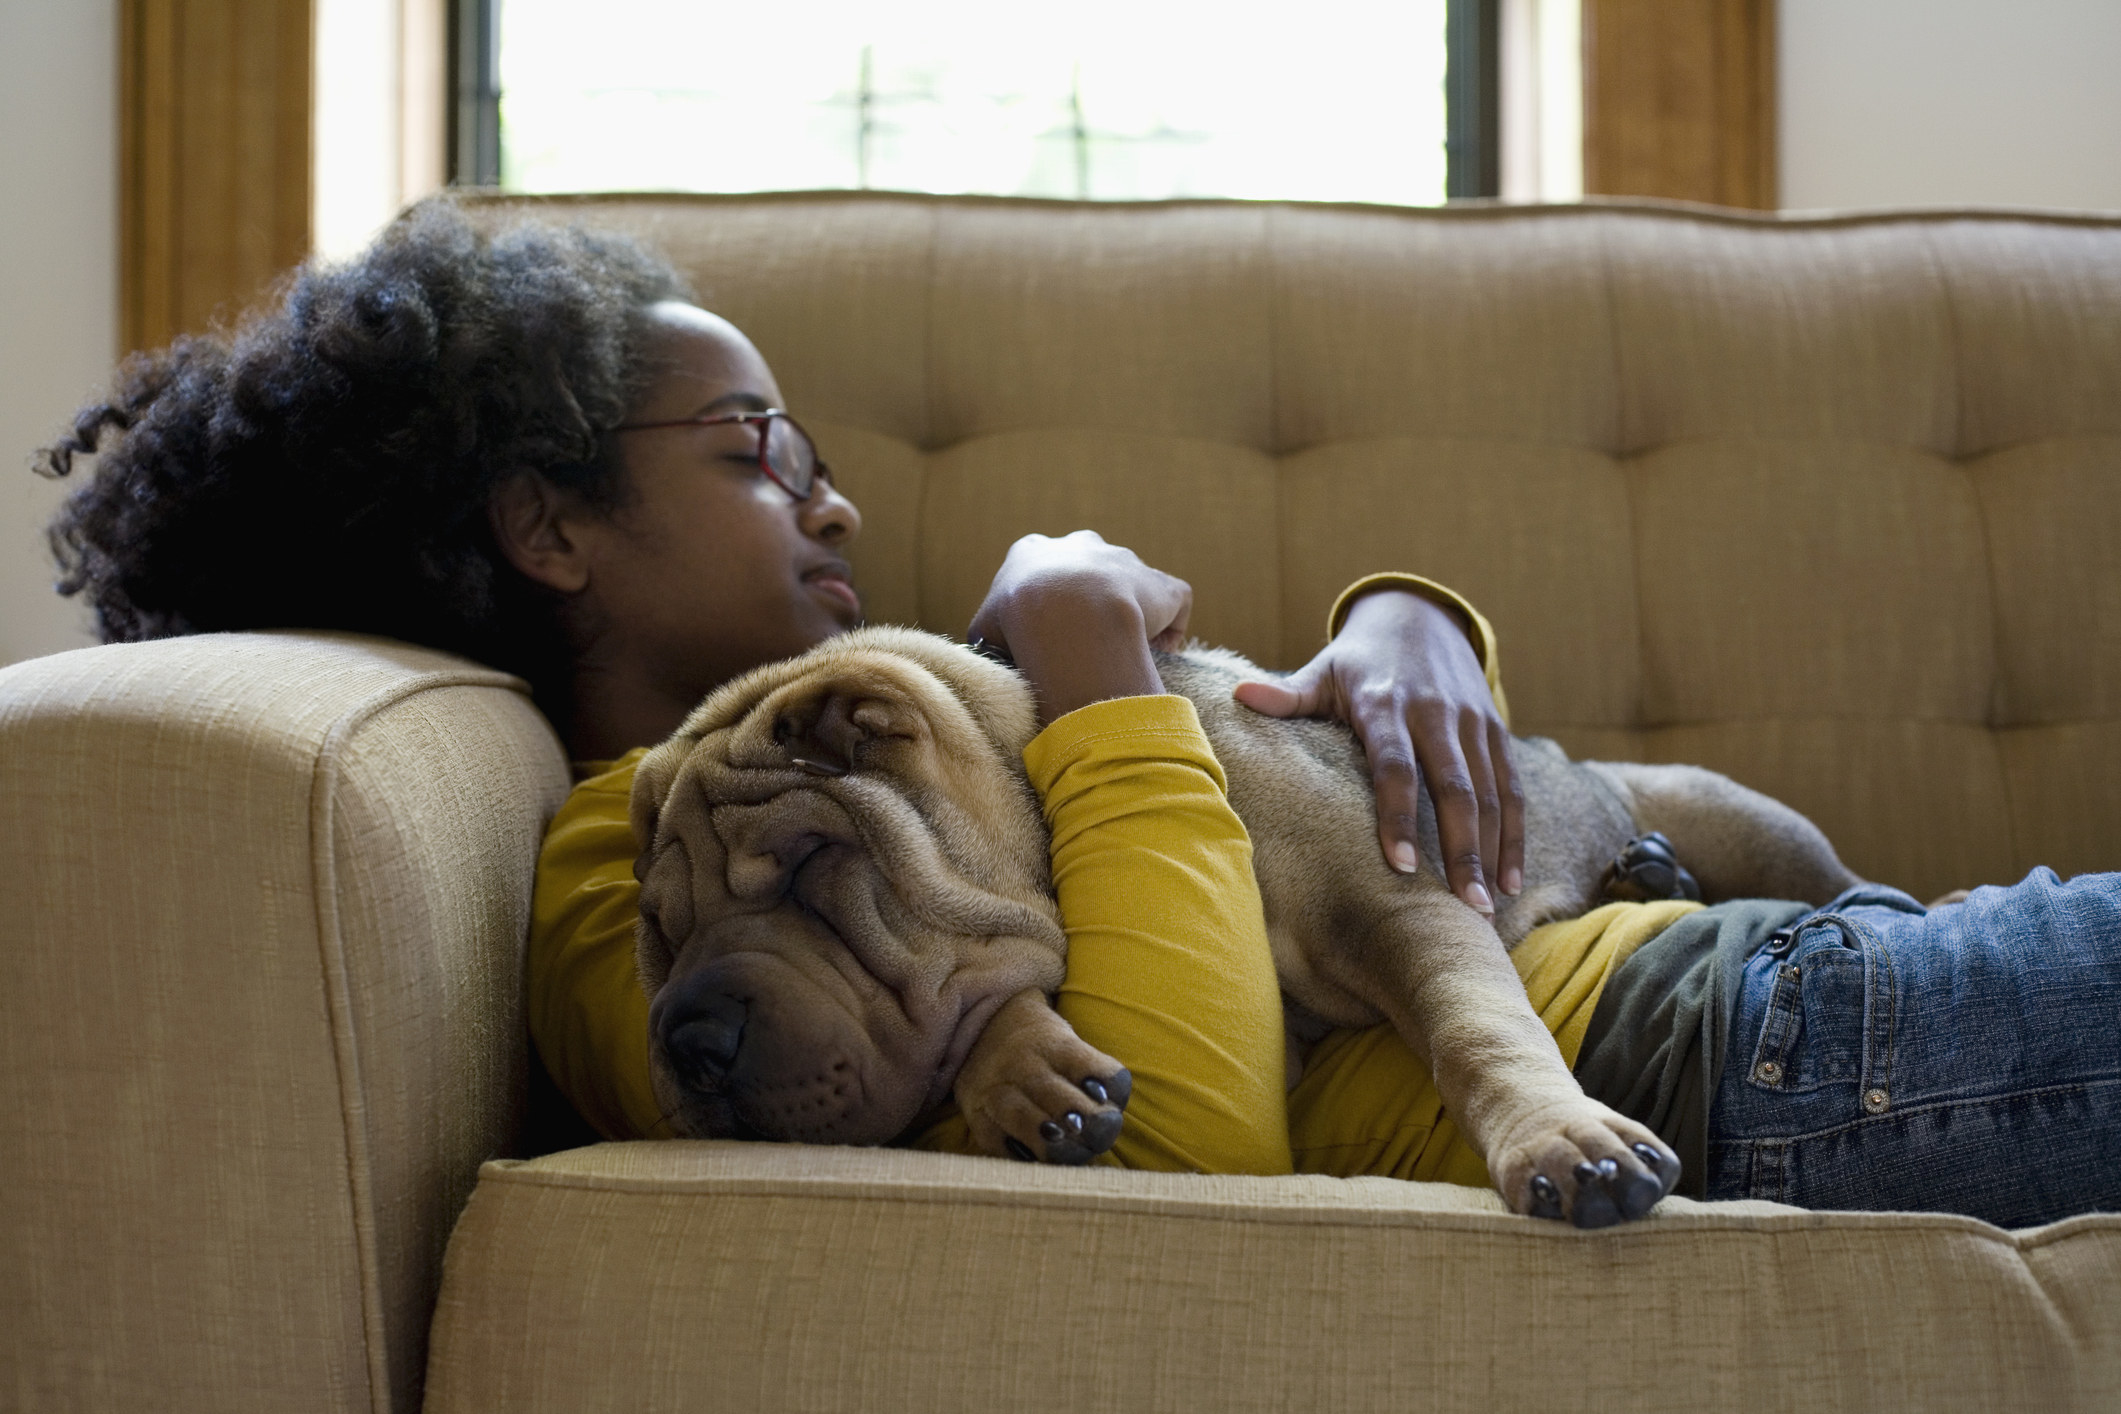 A woman naps on a couch with her dog in her arms